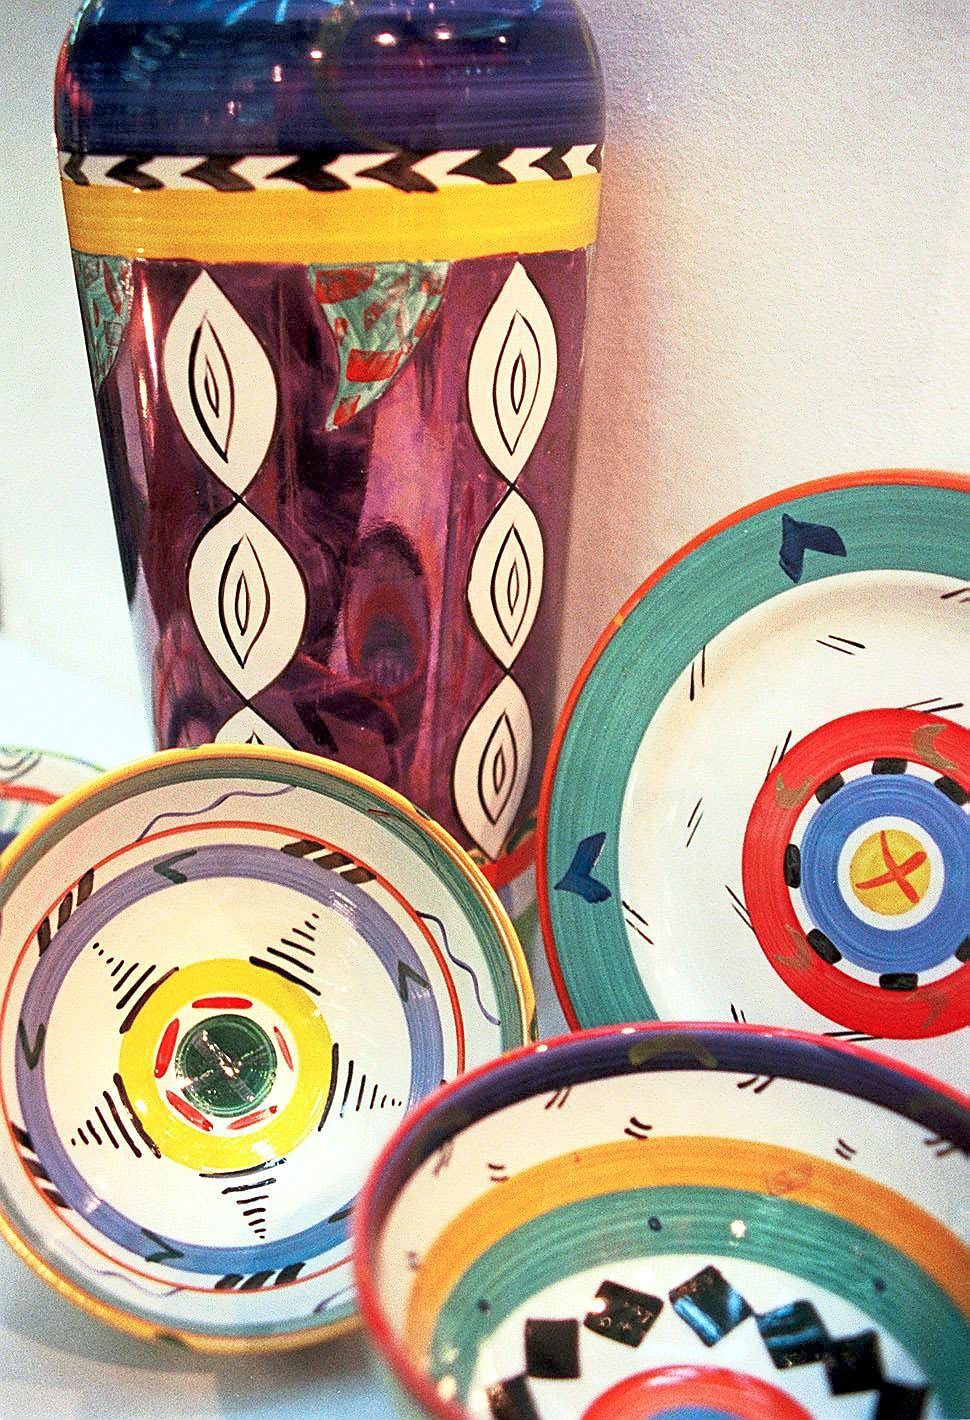 Change to tableware with bright, cheerful colours. — Filepic